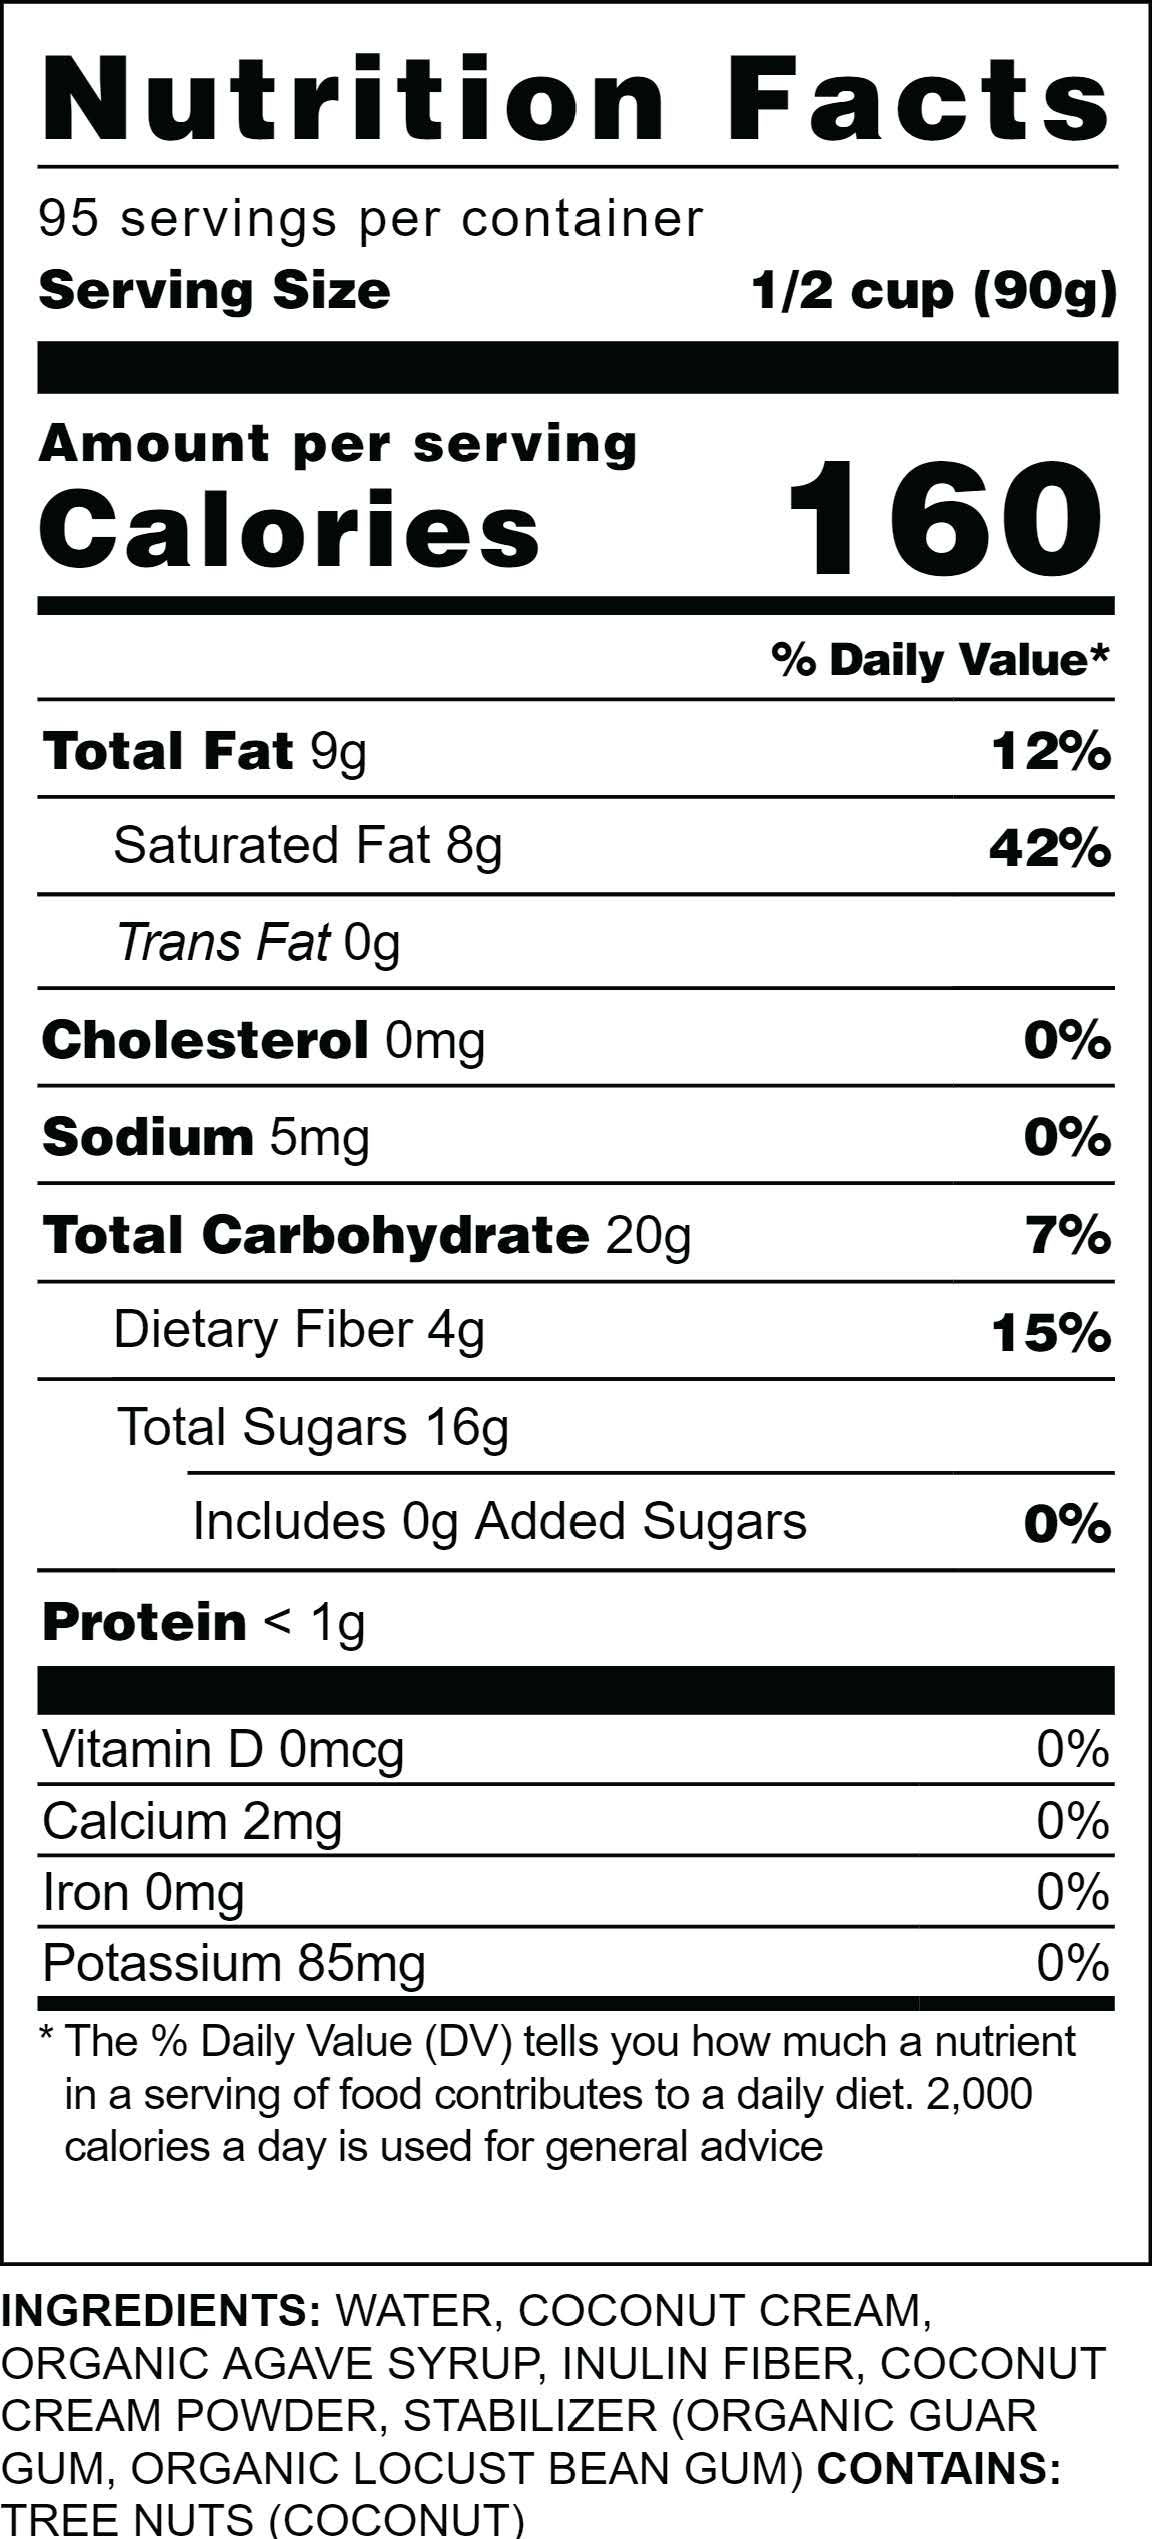 15 Magic Cup Nutrition Facts 